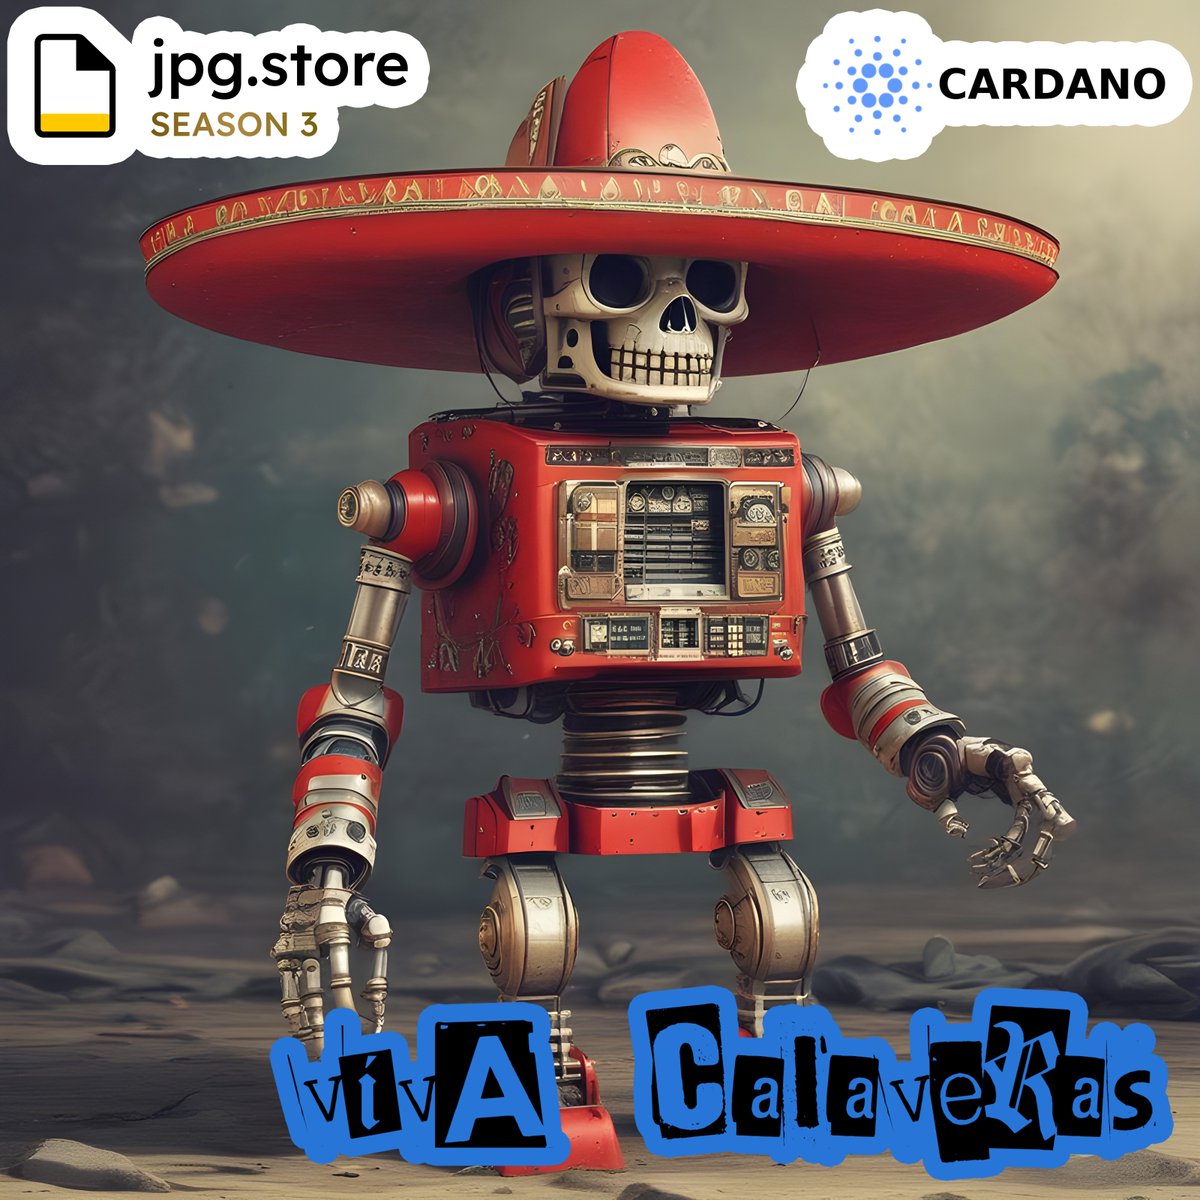 Viva Calaveras on Cardano via jpg.store ! These NFTs can be redeemed for a signed 3D printed K-SCOPES® Trading Card.

Nico
jpg.store/listing/226786…

#cardano #ADA #CardanoNFT #CardanoCommunity #NFT #vivacalaveras #calaveras #kscopes #tradingcards #3dprinting #AI